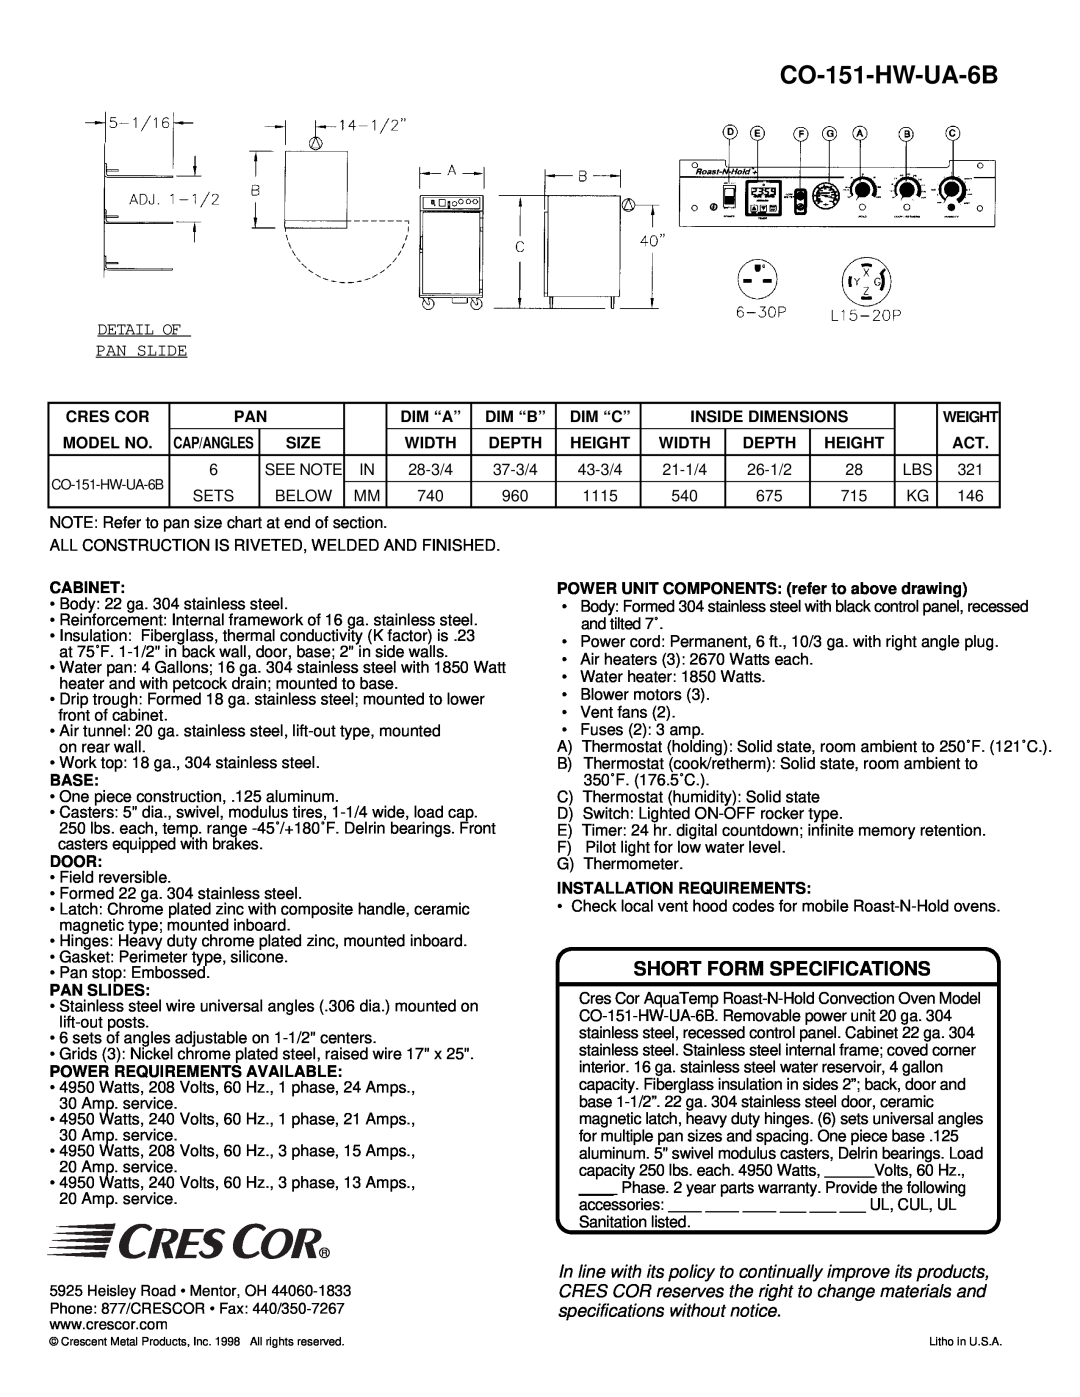 Cres Cor CO-151-HW-UA-6B manual Short Form Specifications, Detail Of Pan Slide 